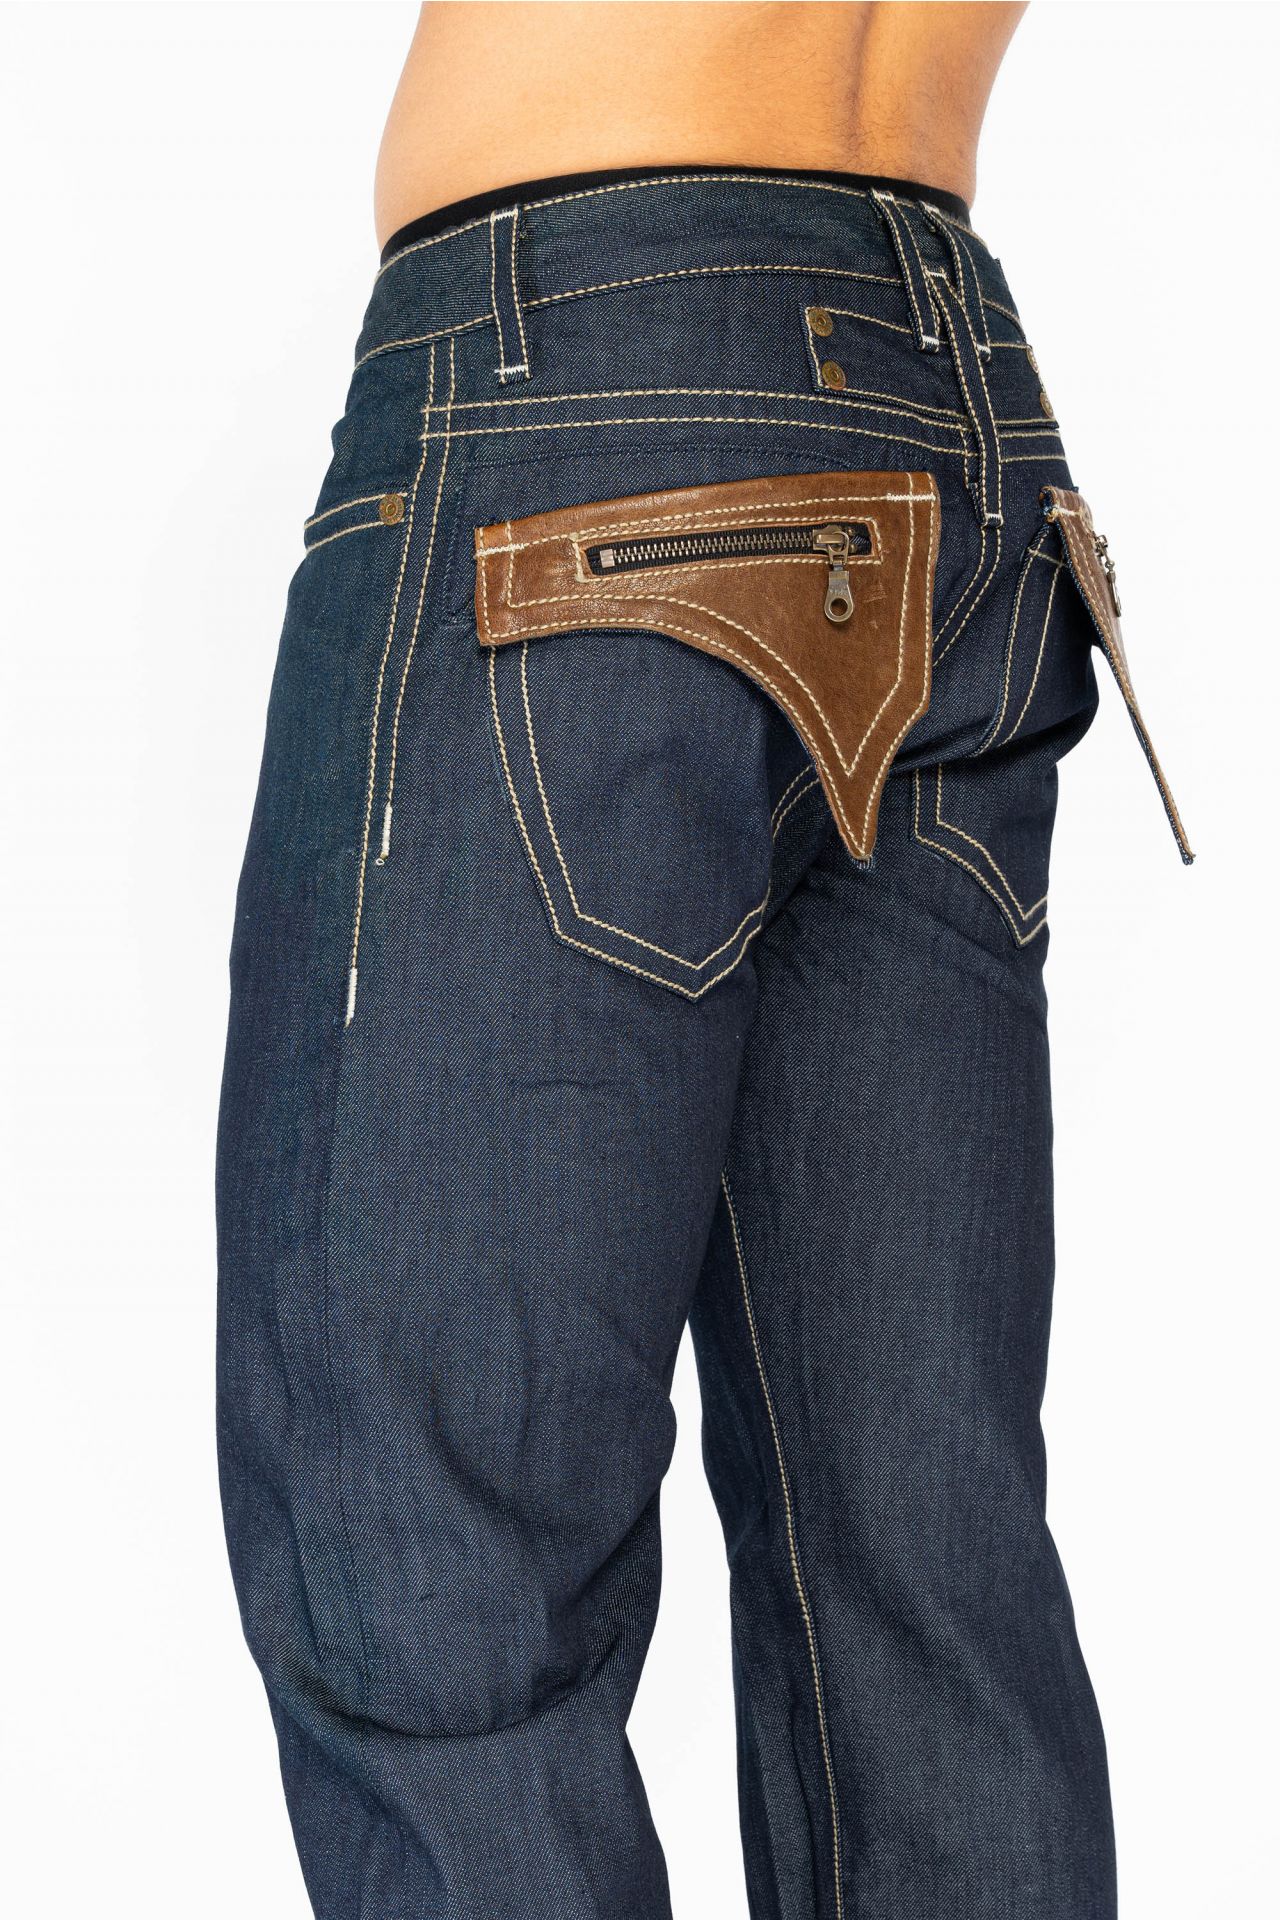 ROBIN'S RAW DENIM COLLECTION MOTORCYCLE CLUB JEANS WITH LEATHER POCKETS